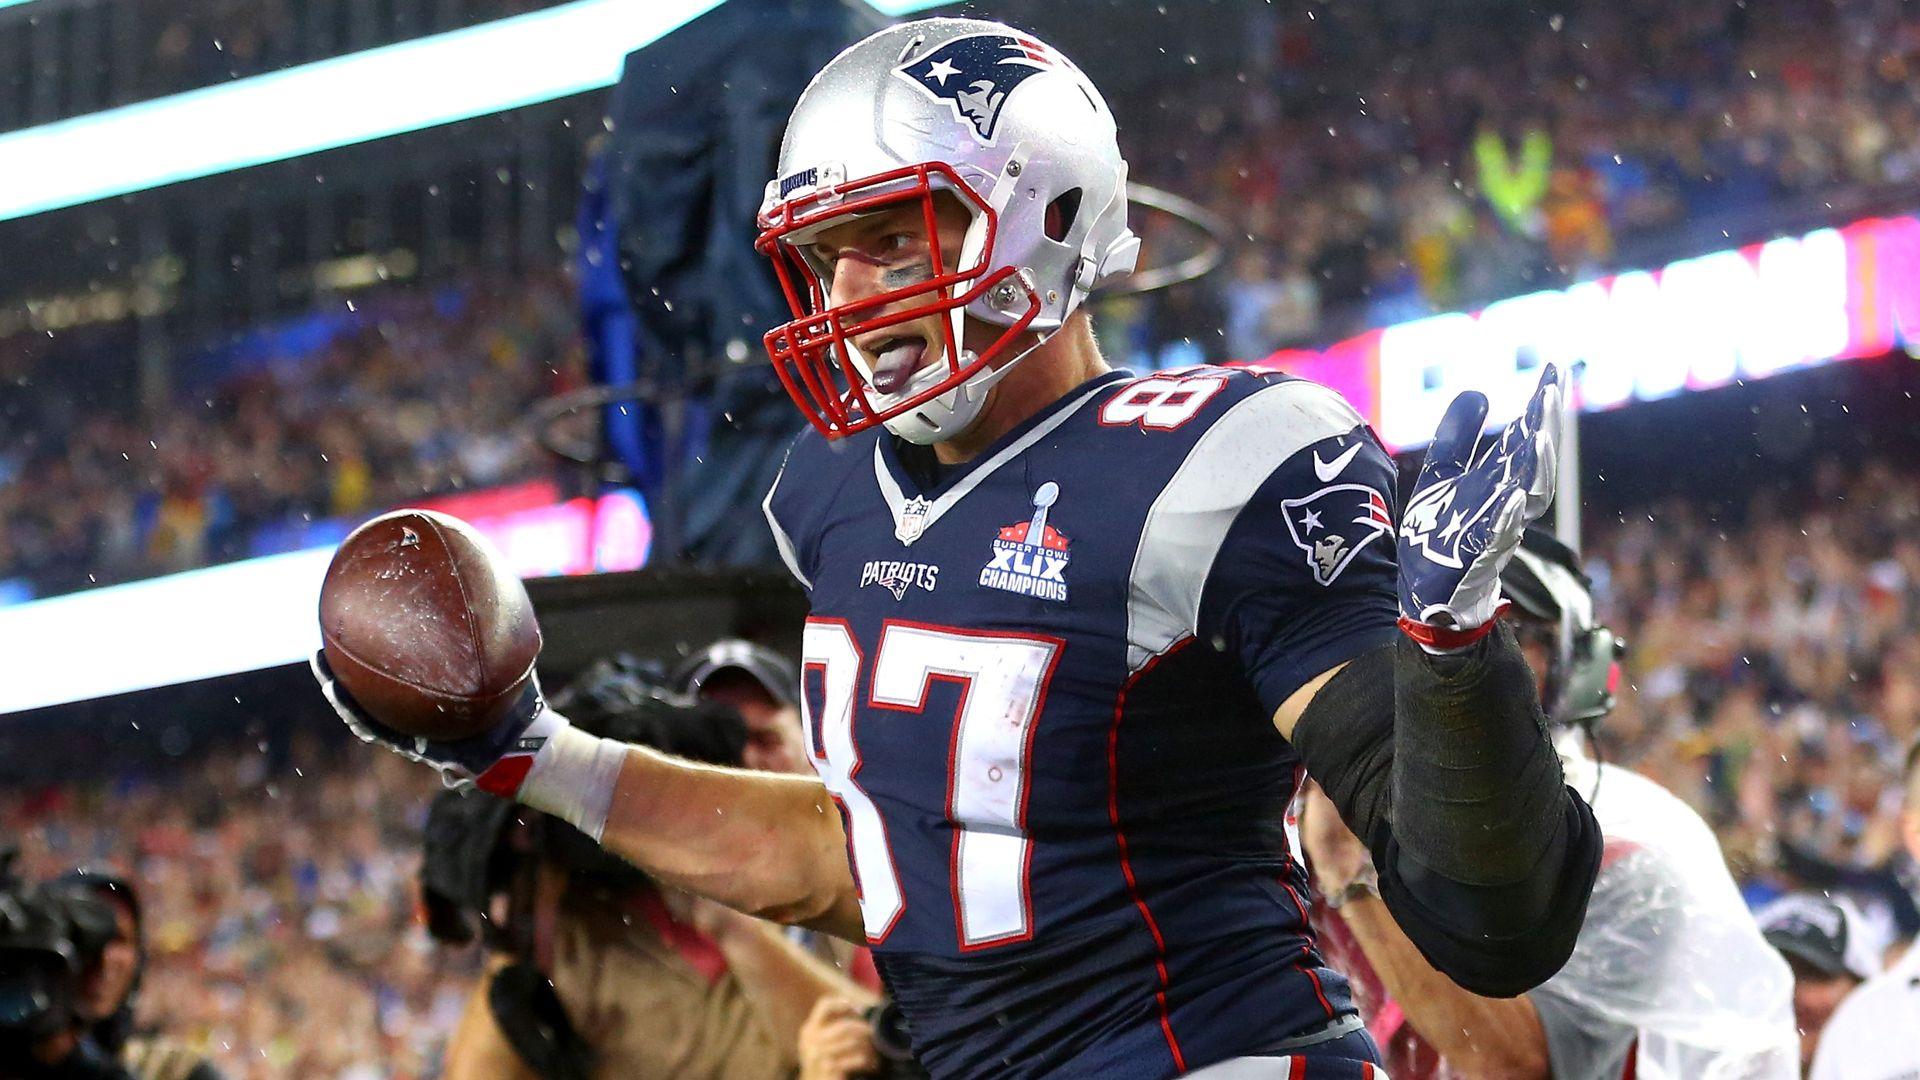 Rob Gronkowski to play Thursday for Patriots against Texans, per